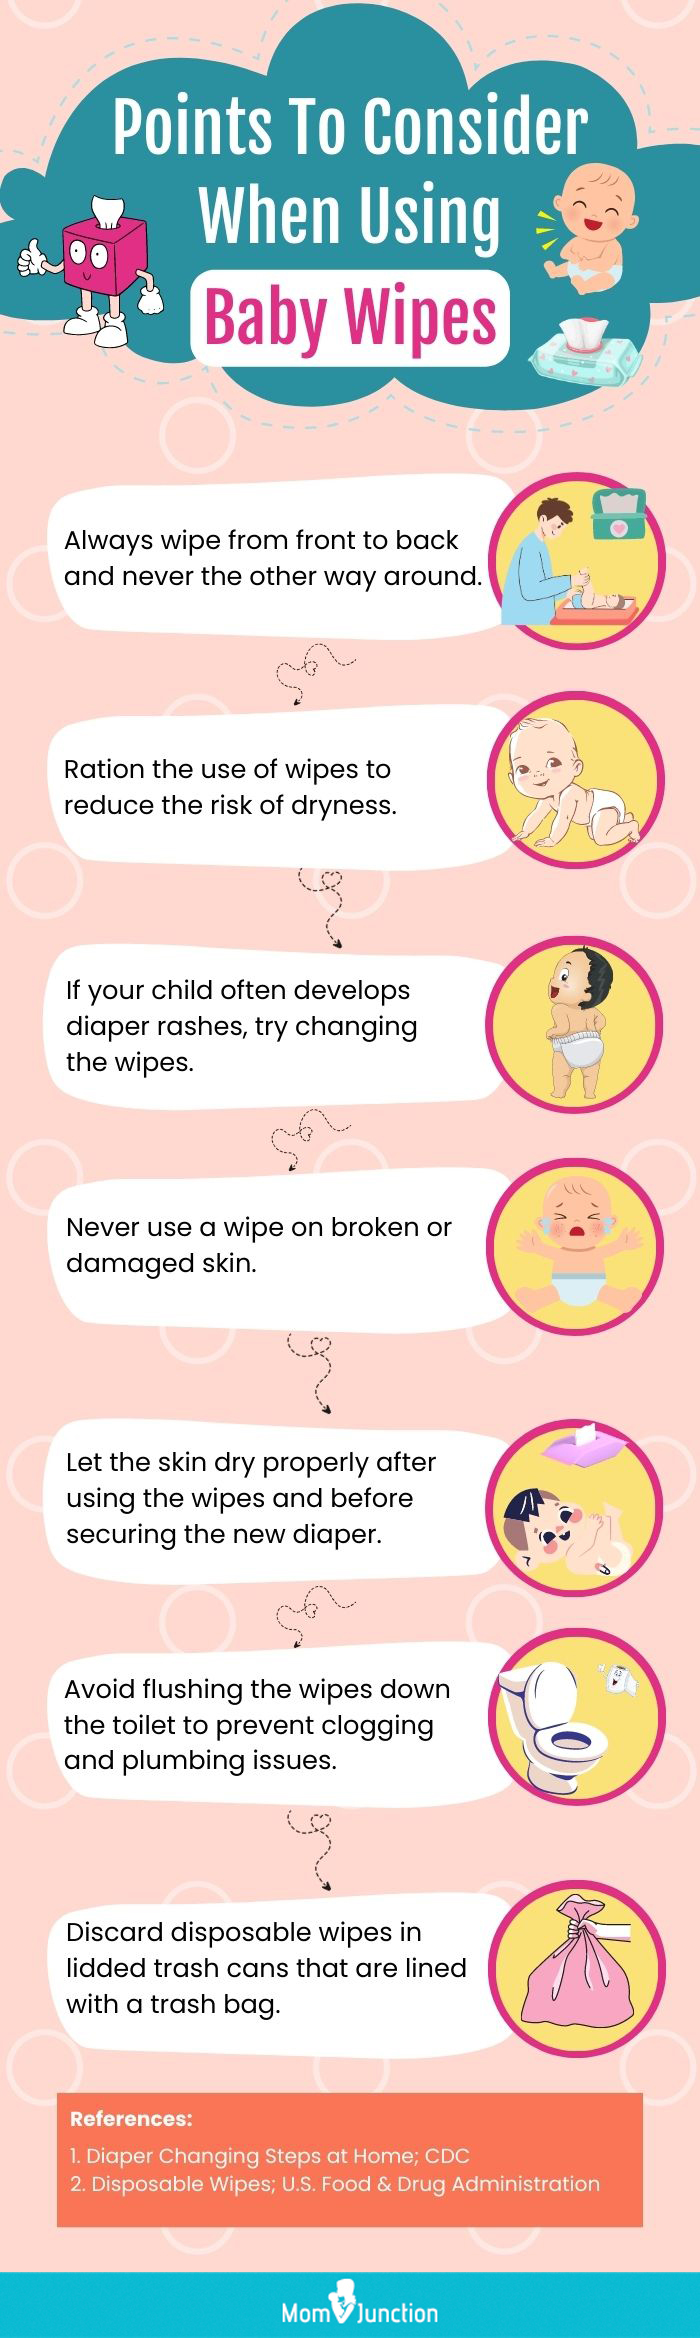 Points To Consider When Using Baby Wipes (Infographic)